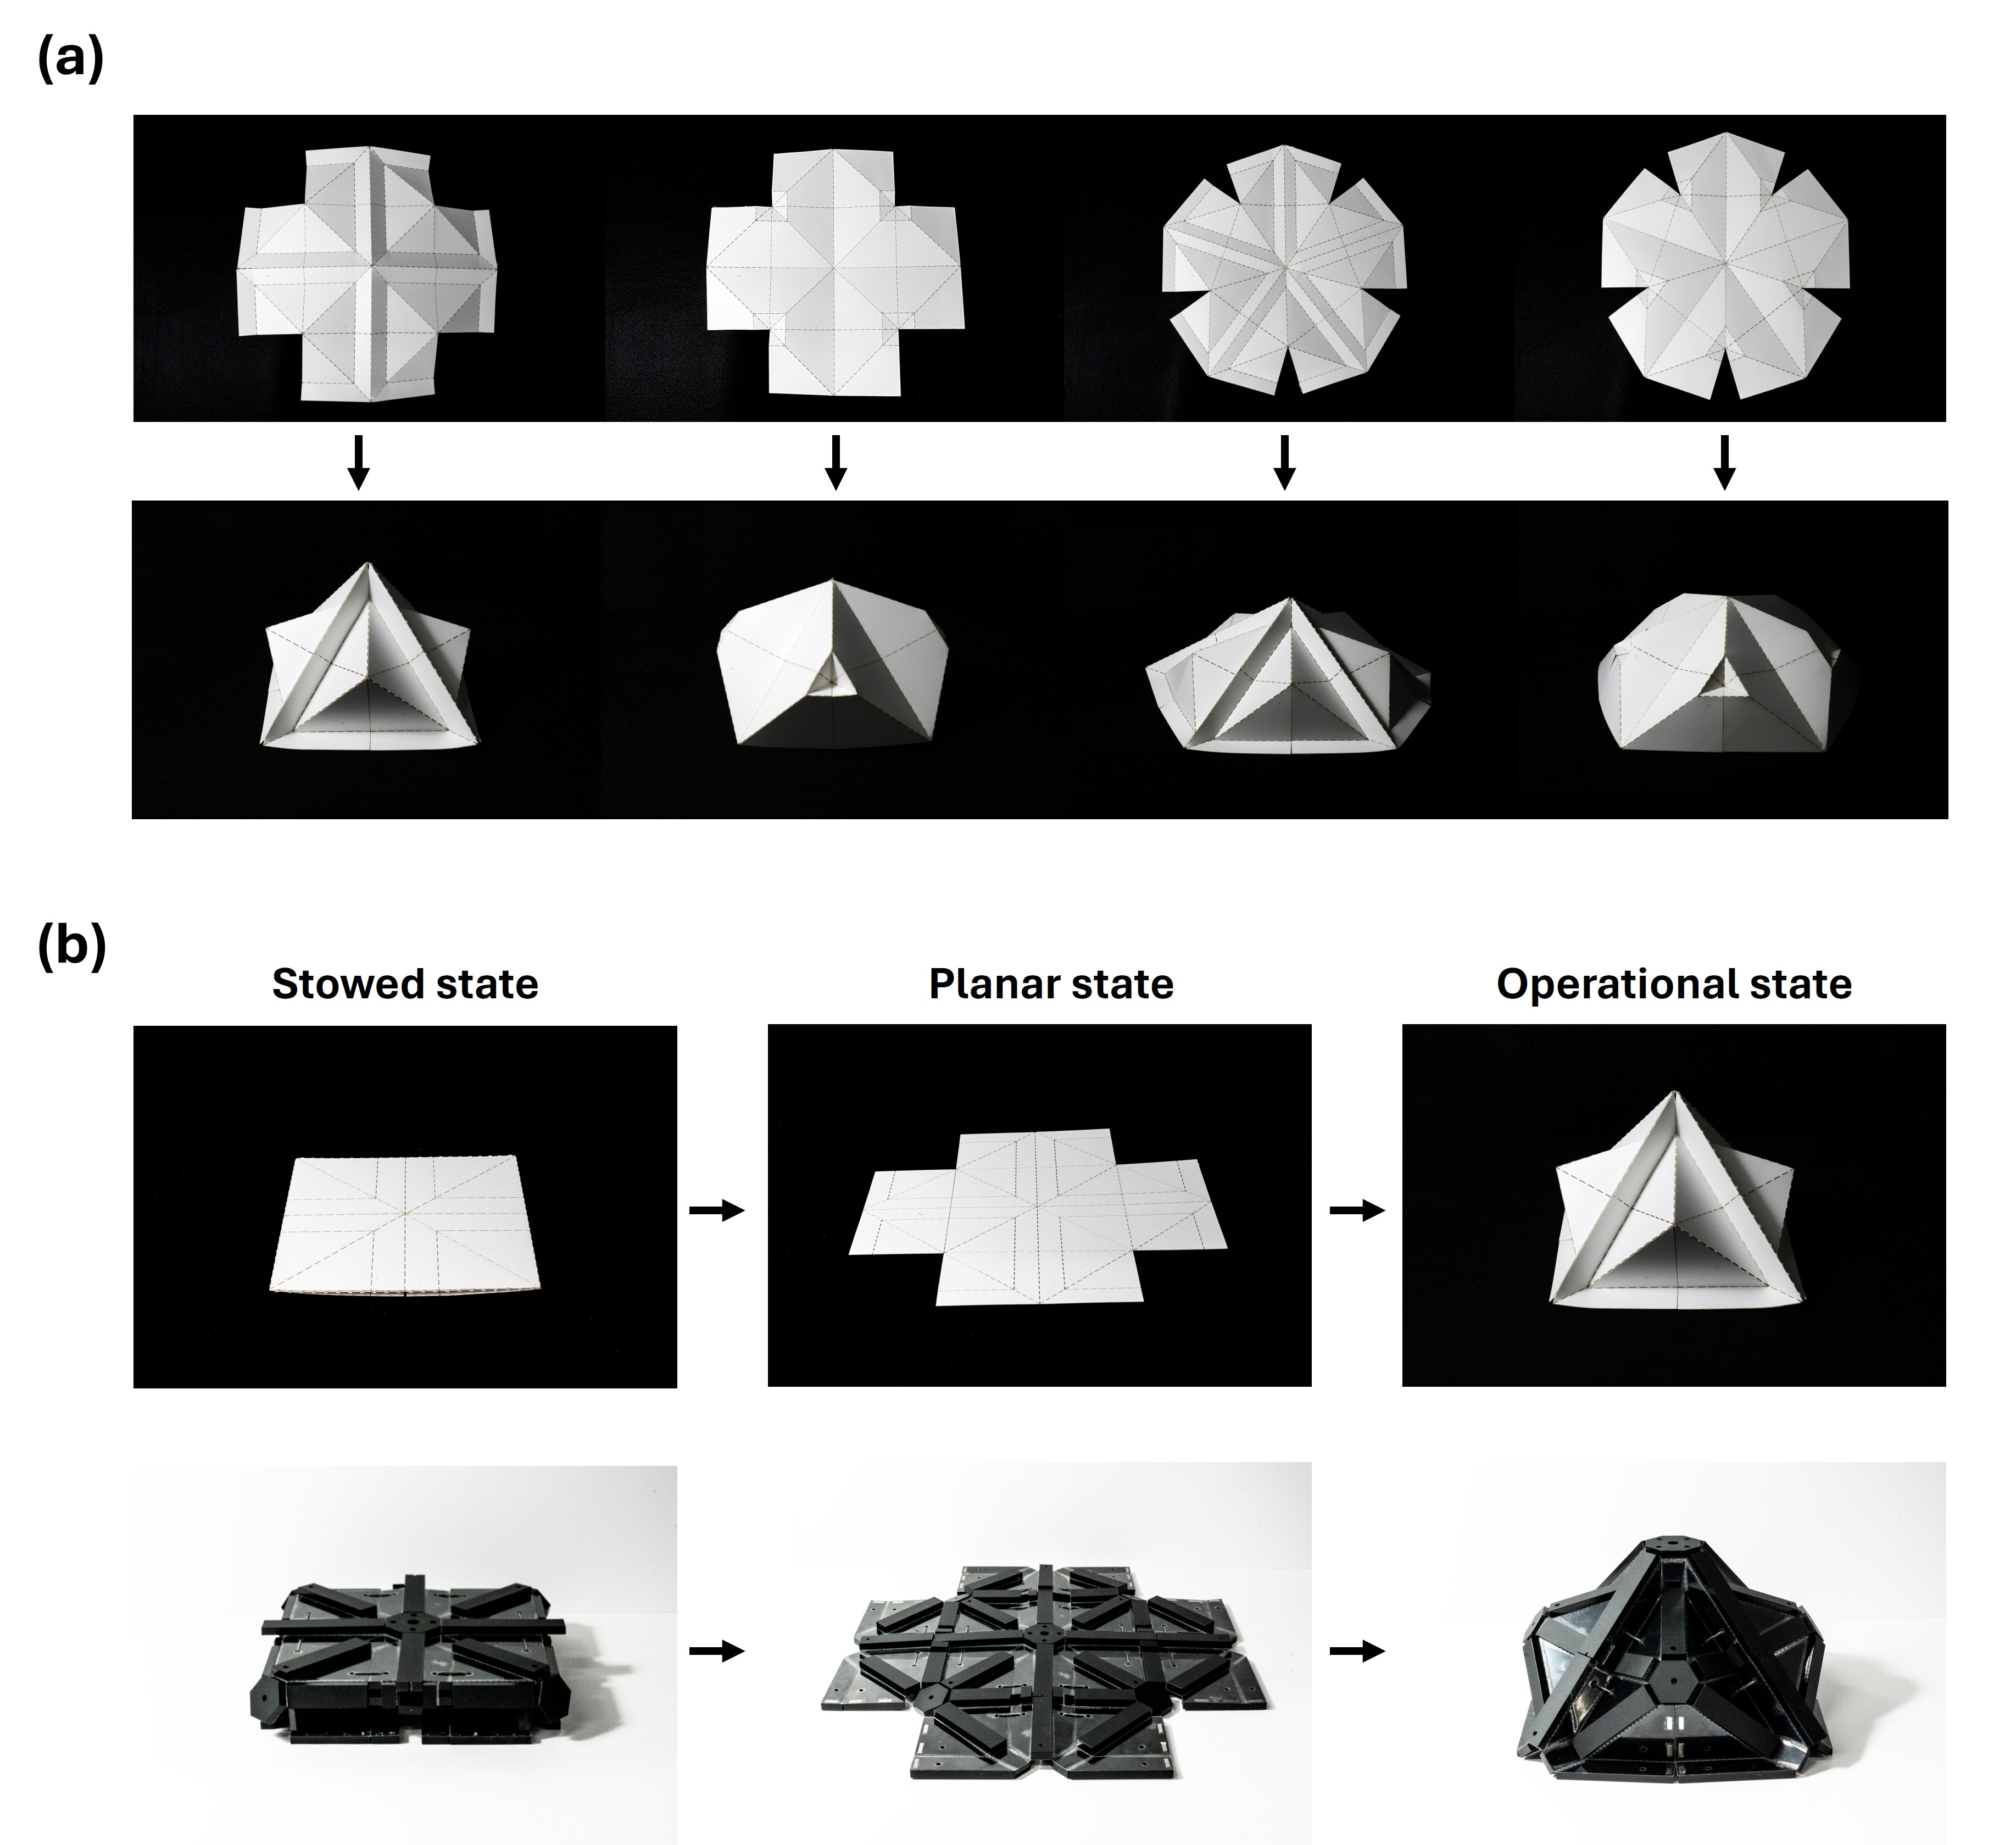 Figure 2. Foundational pattern for the deployable space shelter (a) Various patterns and operational shapes, (b) Folding process of paper model and thick-paneled modell